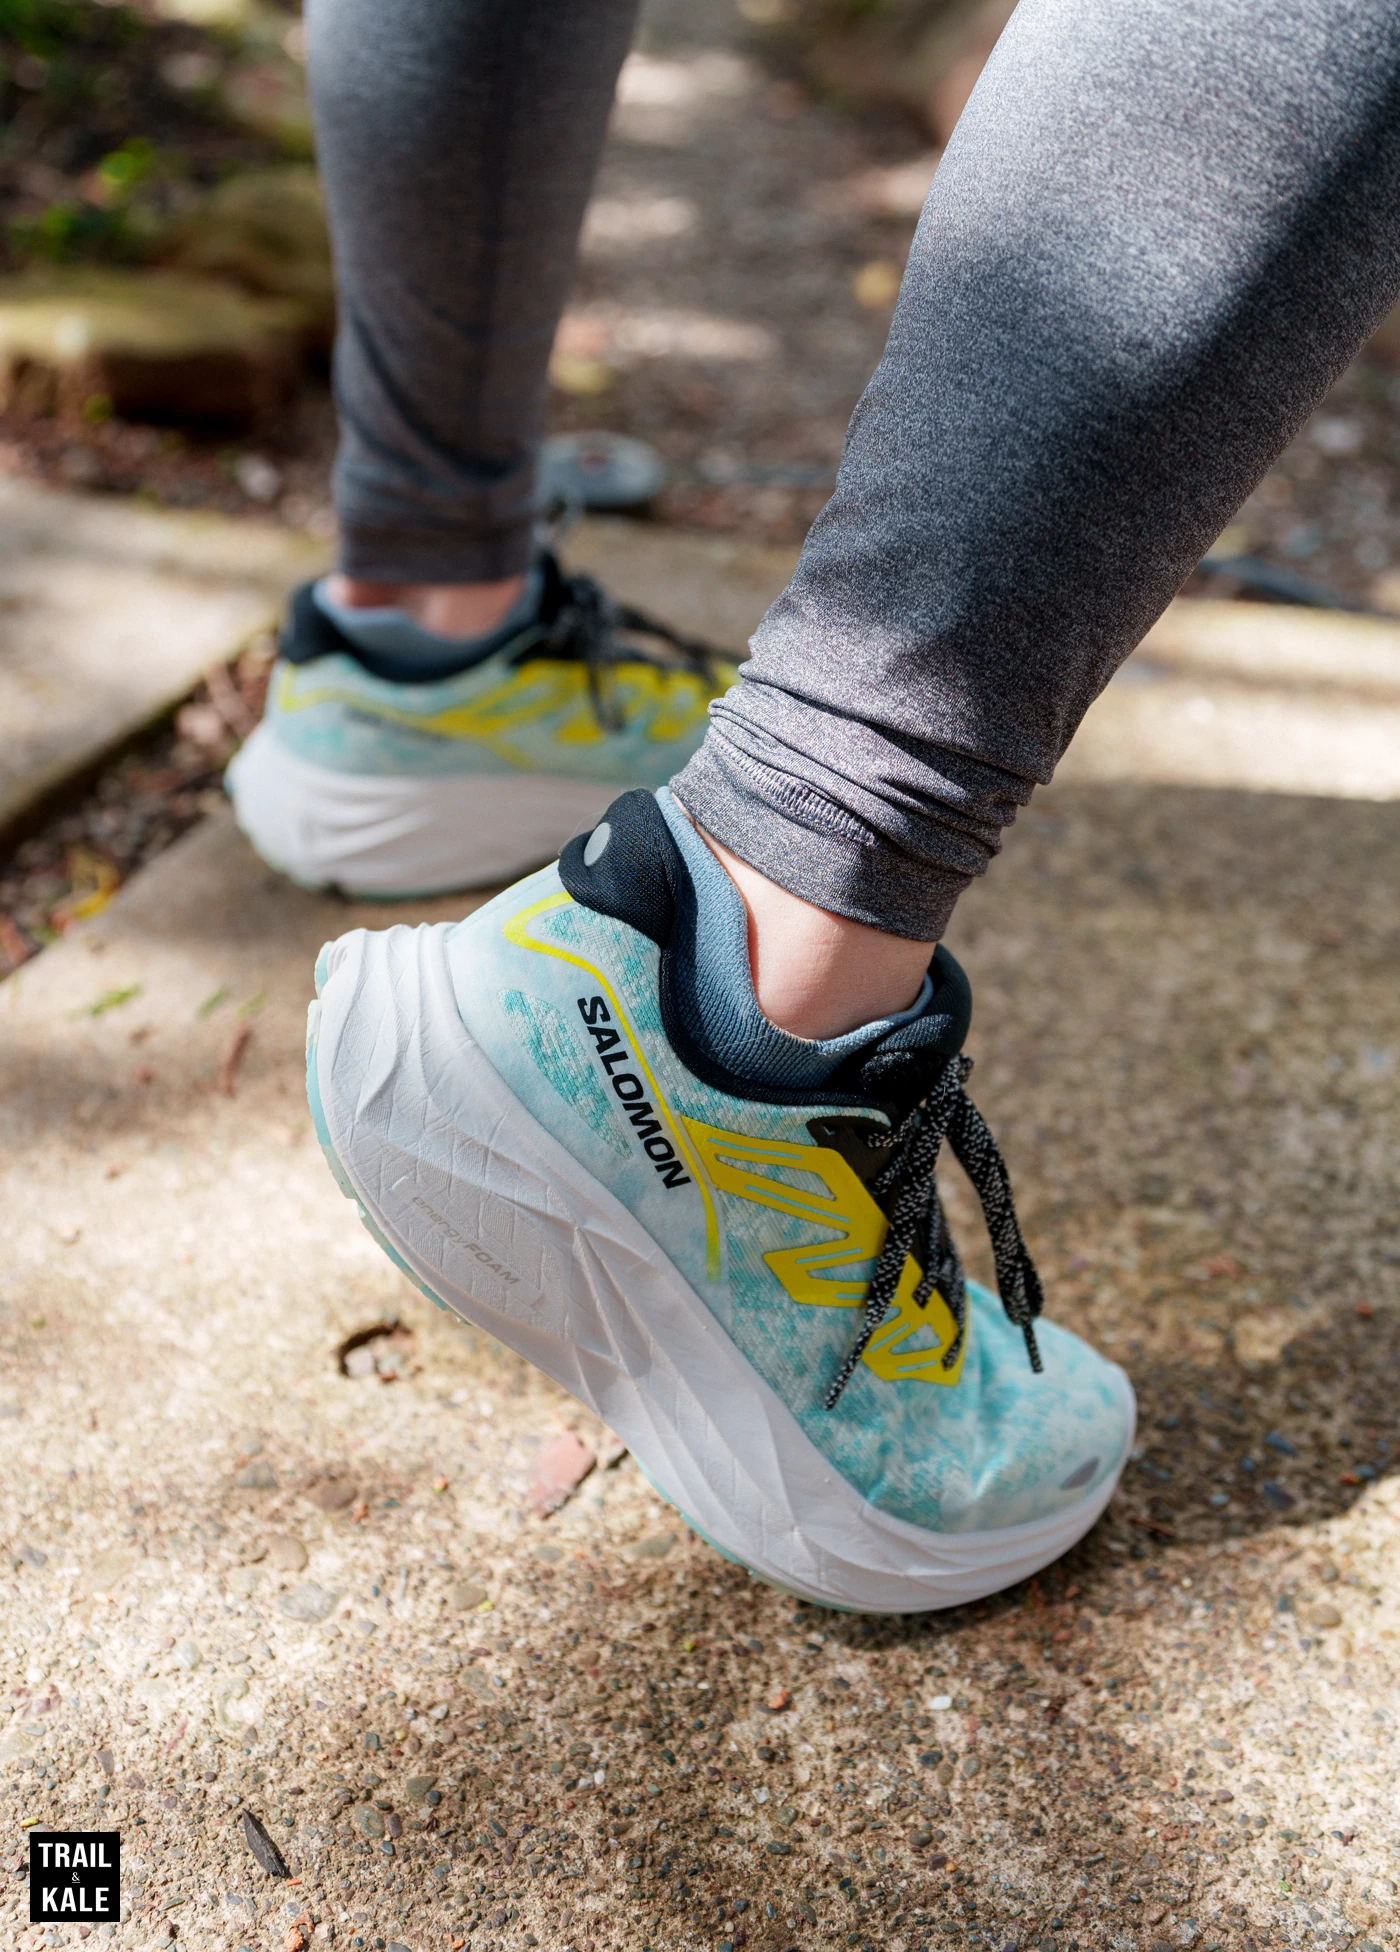 The Salomon Aero Glide 2 are a great choice for ticking off the miles on longer runs.